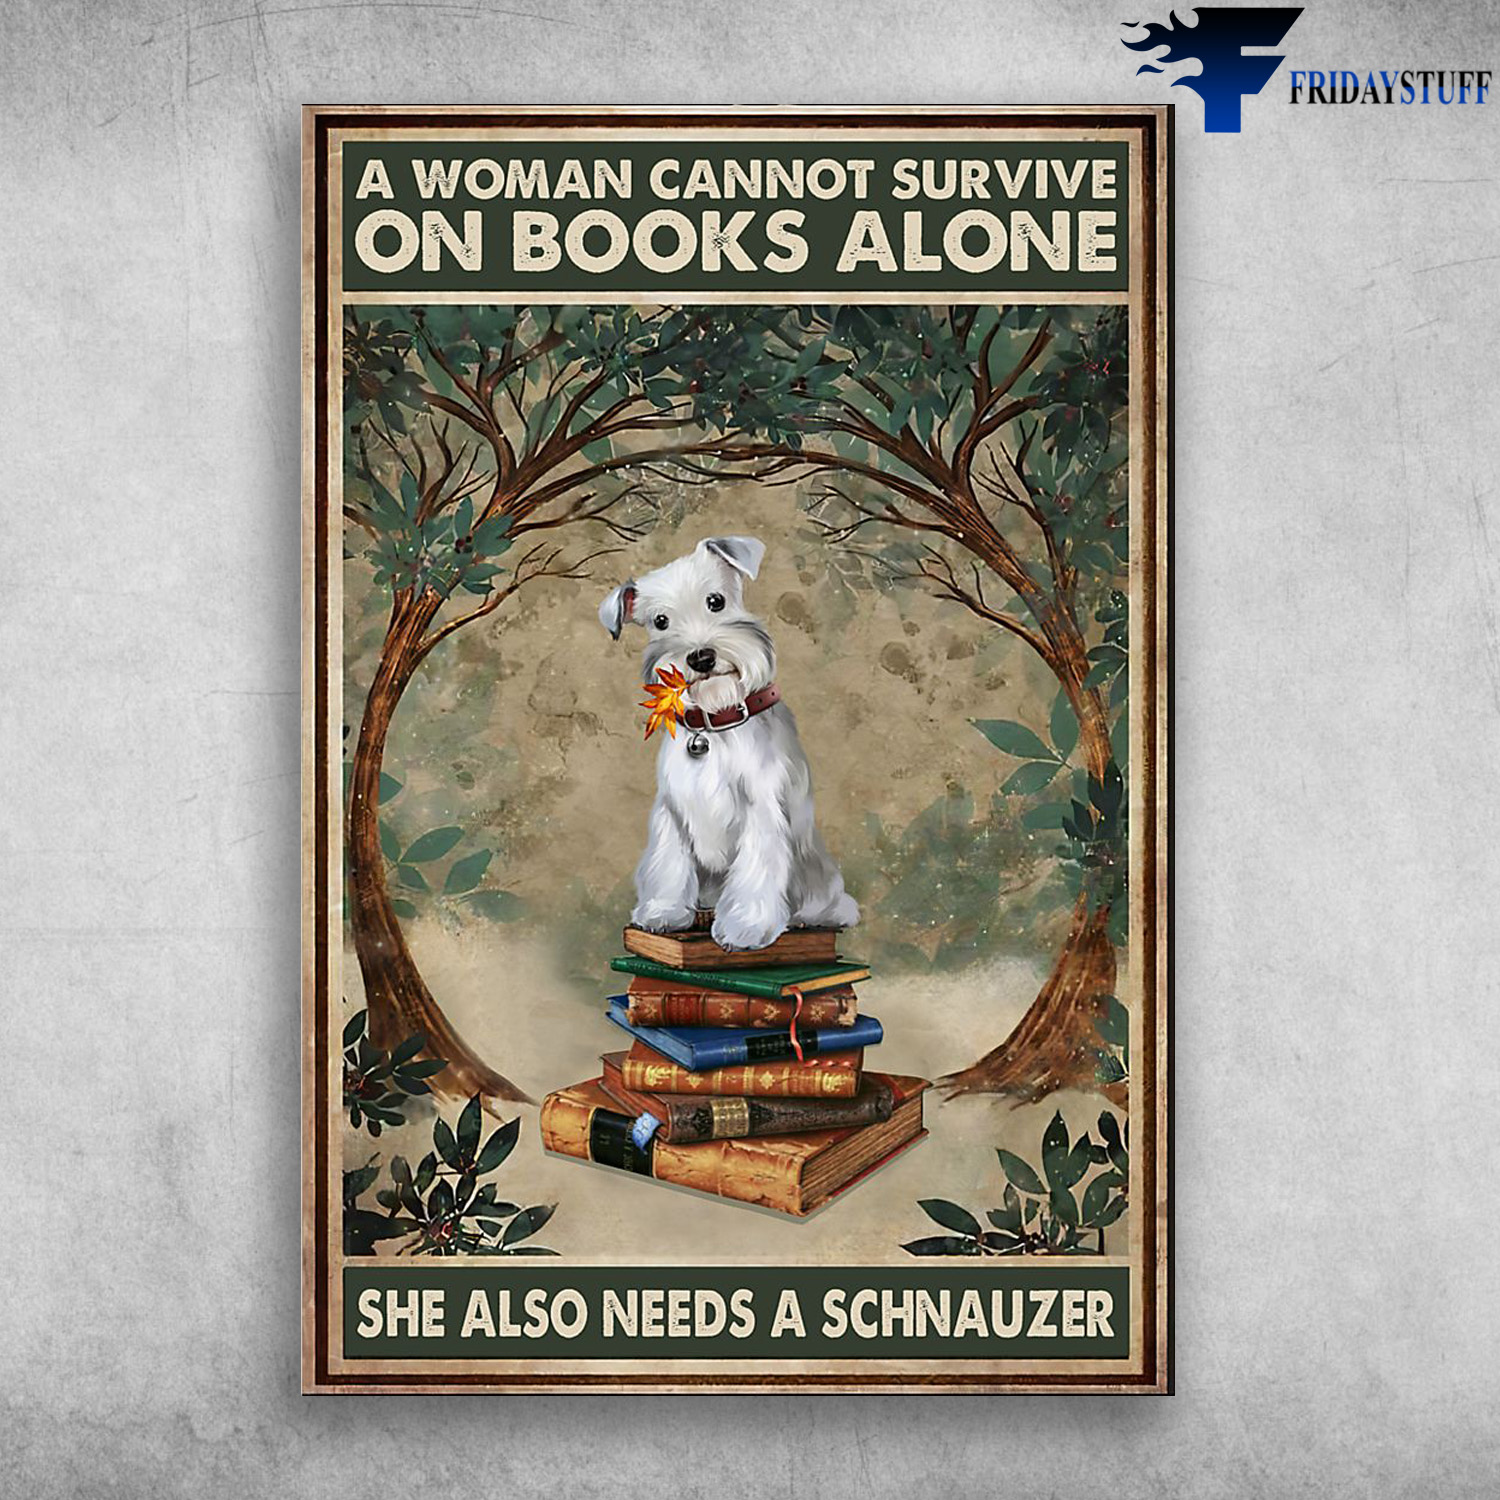 Schnauzed Sitting On The Books - A Woman Cannot Survive On Books Alone, She Also Needs A Schnauzed